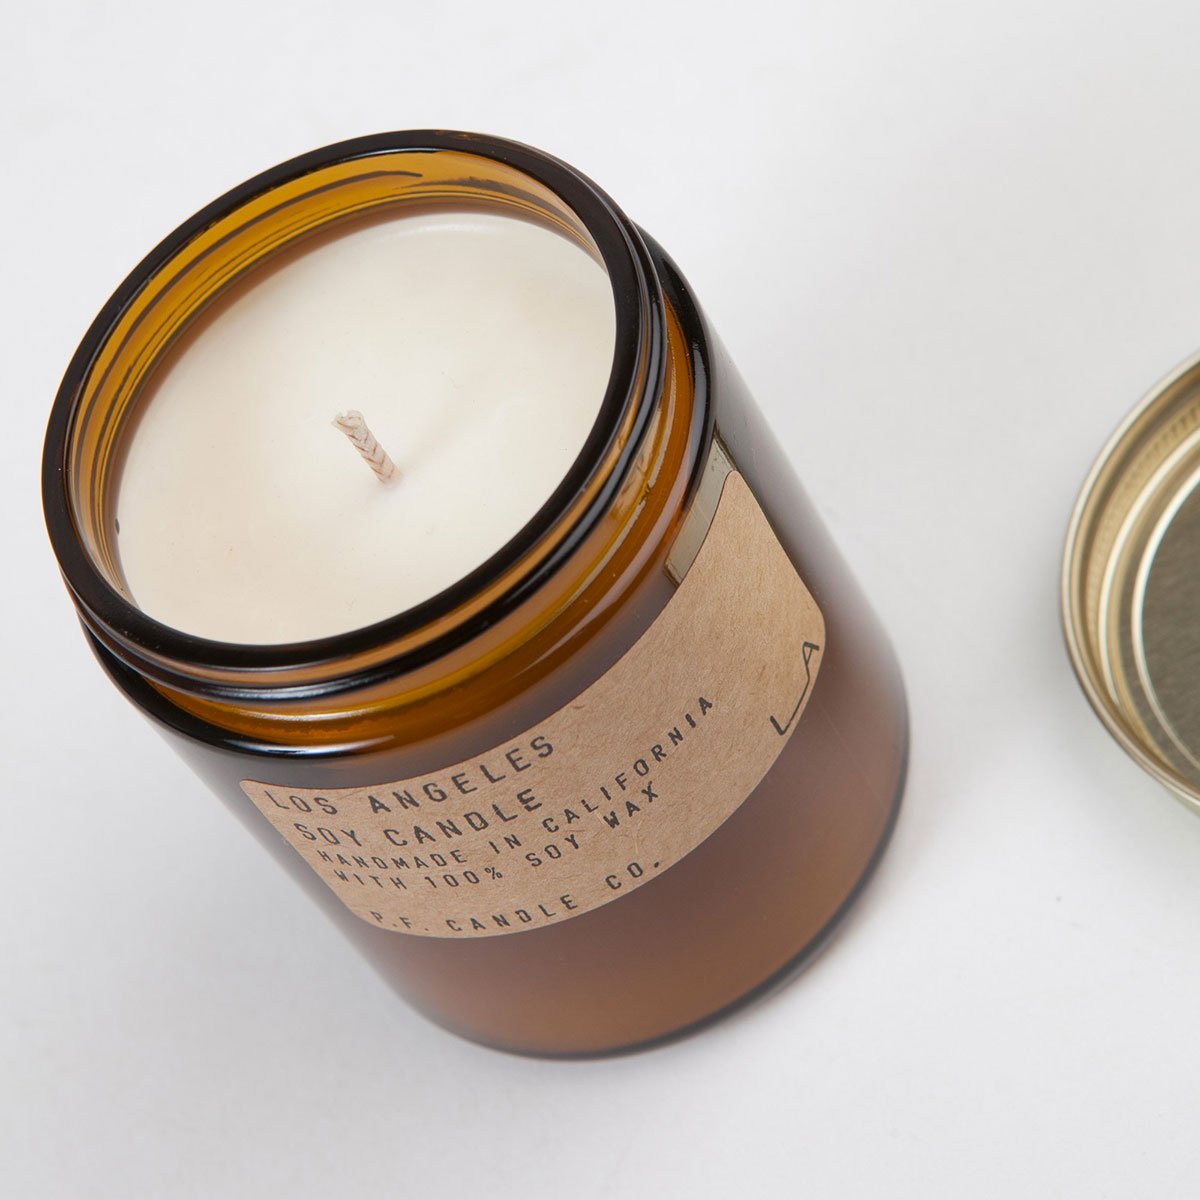 PF Candle co. Los Angeles Candela di soia Shop Online